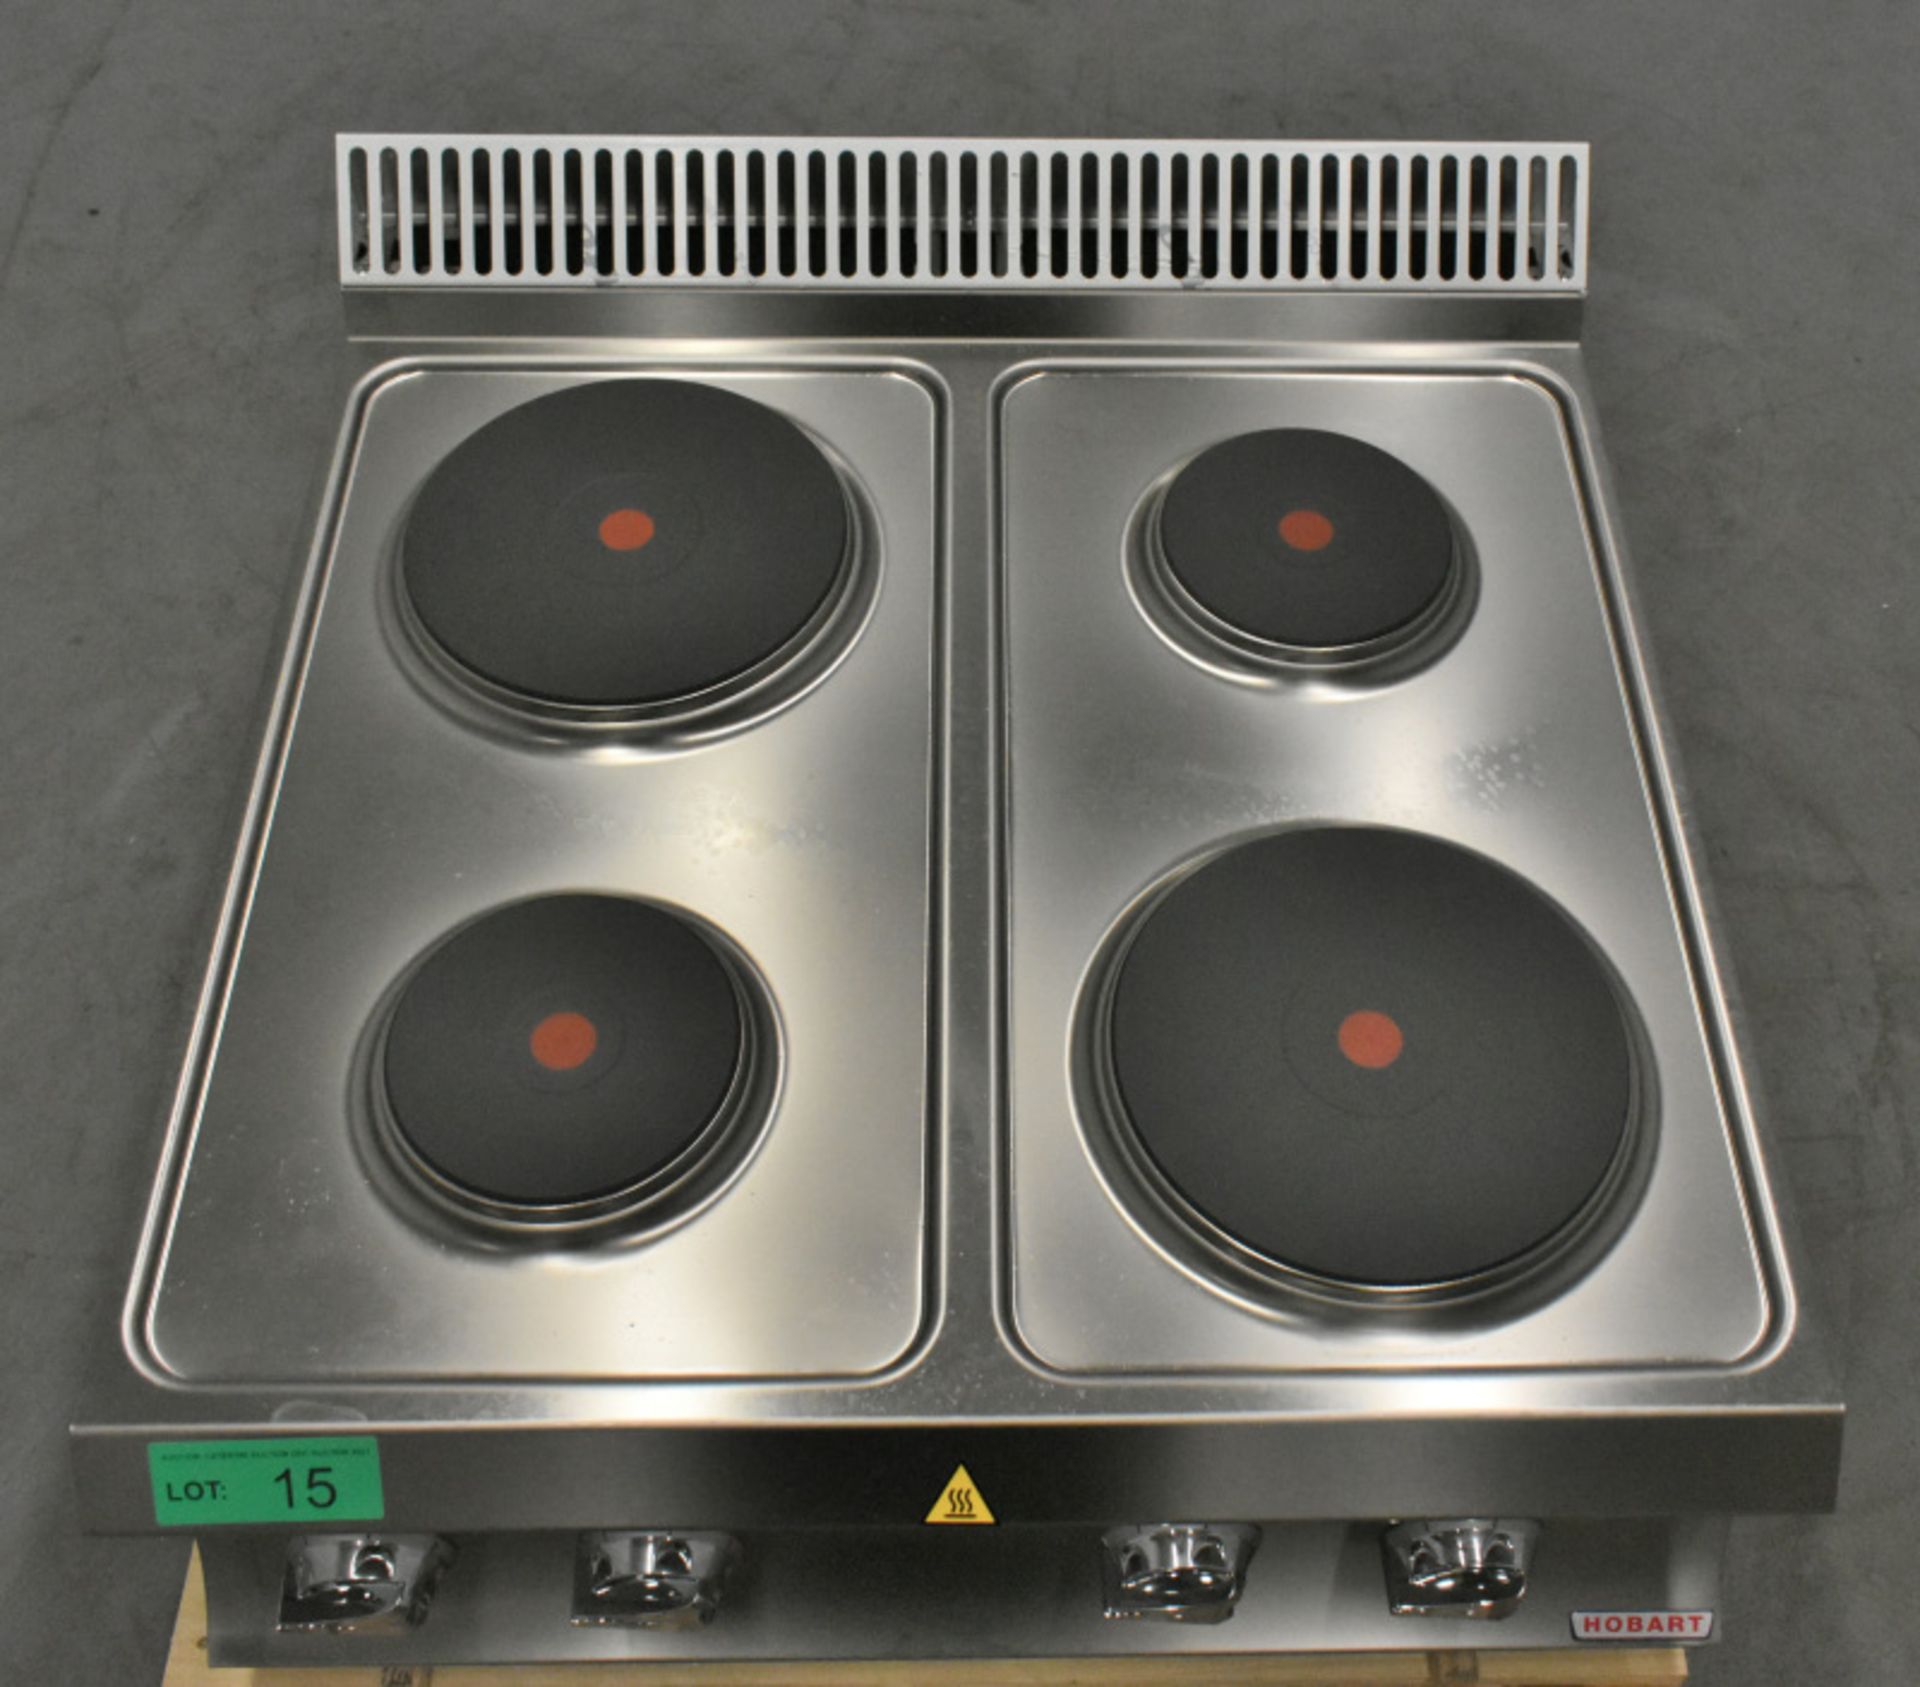 Hobart Electric 4 Round Plate Hob Top - Model HCSE477 - Image 6 of 7